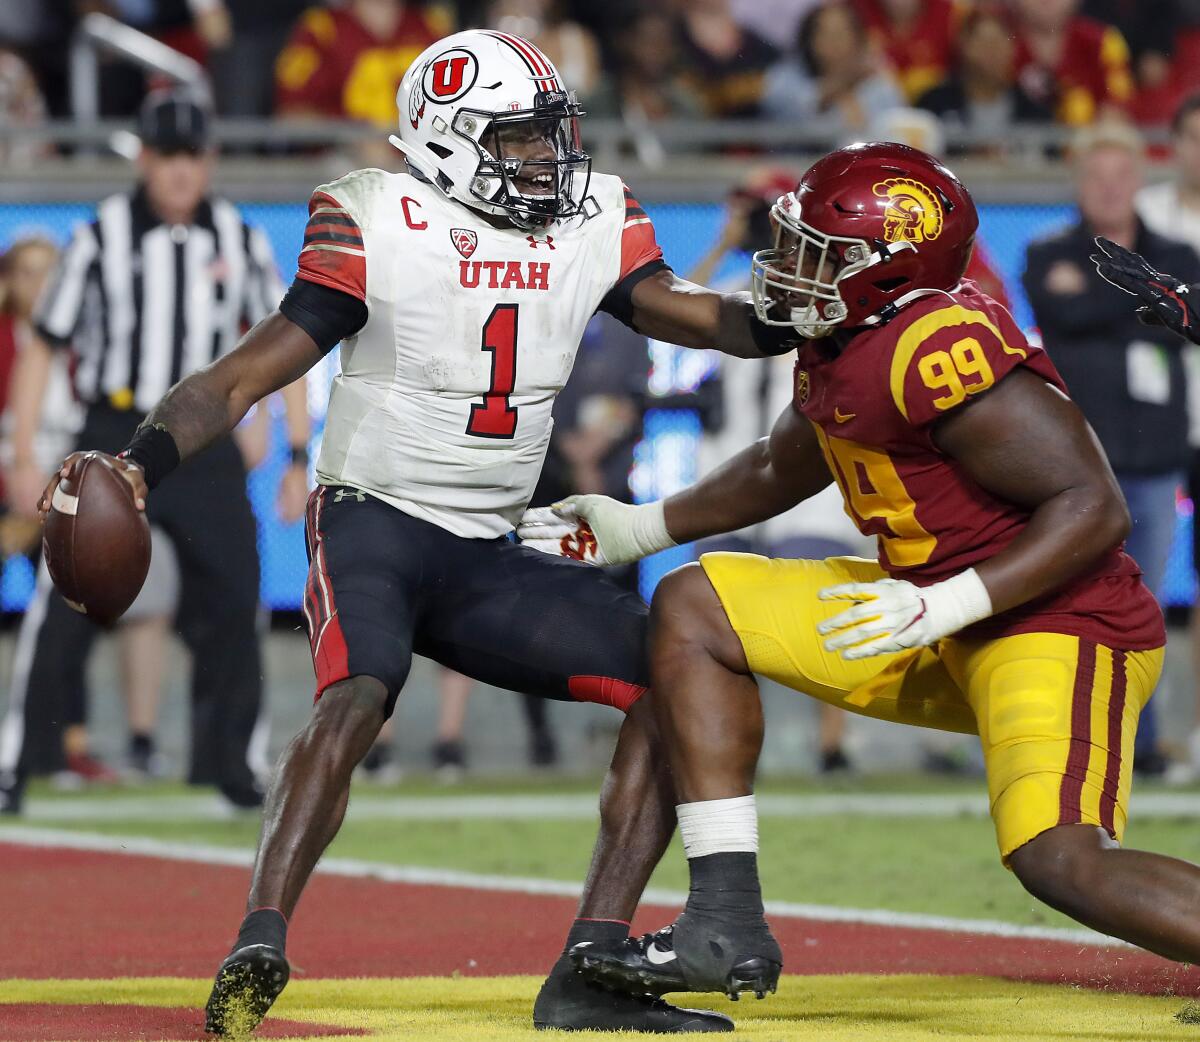 USC defensive lineman Drake Jackson closes in for a sack and safety of Utah quarterback Tyler Huntley in the fourth quarter at the Coliseum on Friday.